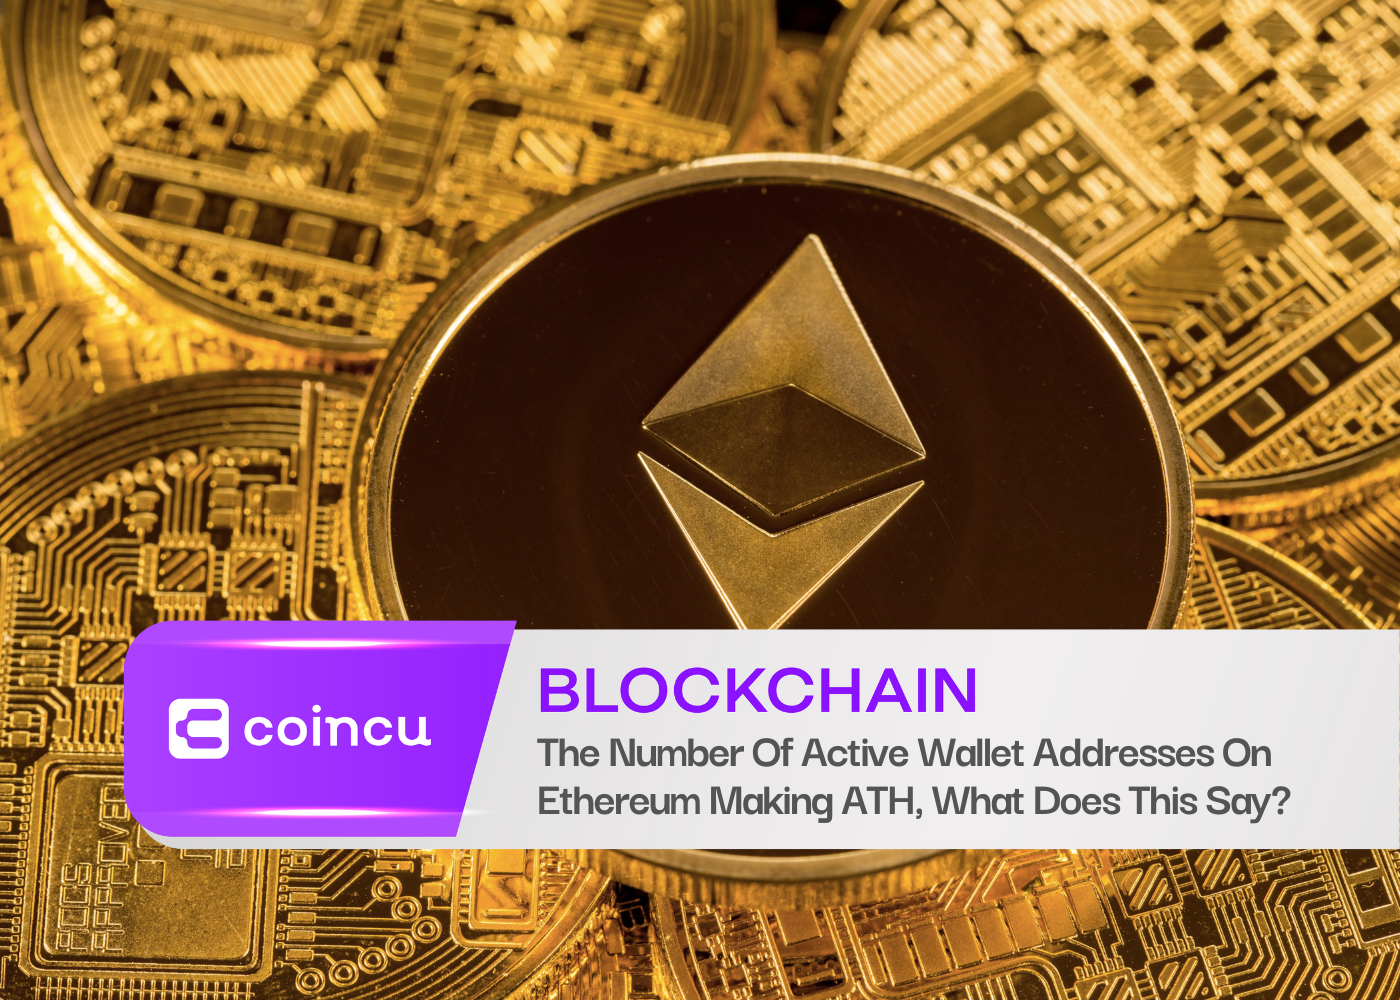 The Number Of Active Wallet Addresses On Ethereum Making ATH, What Does This Say?